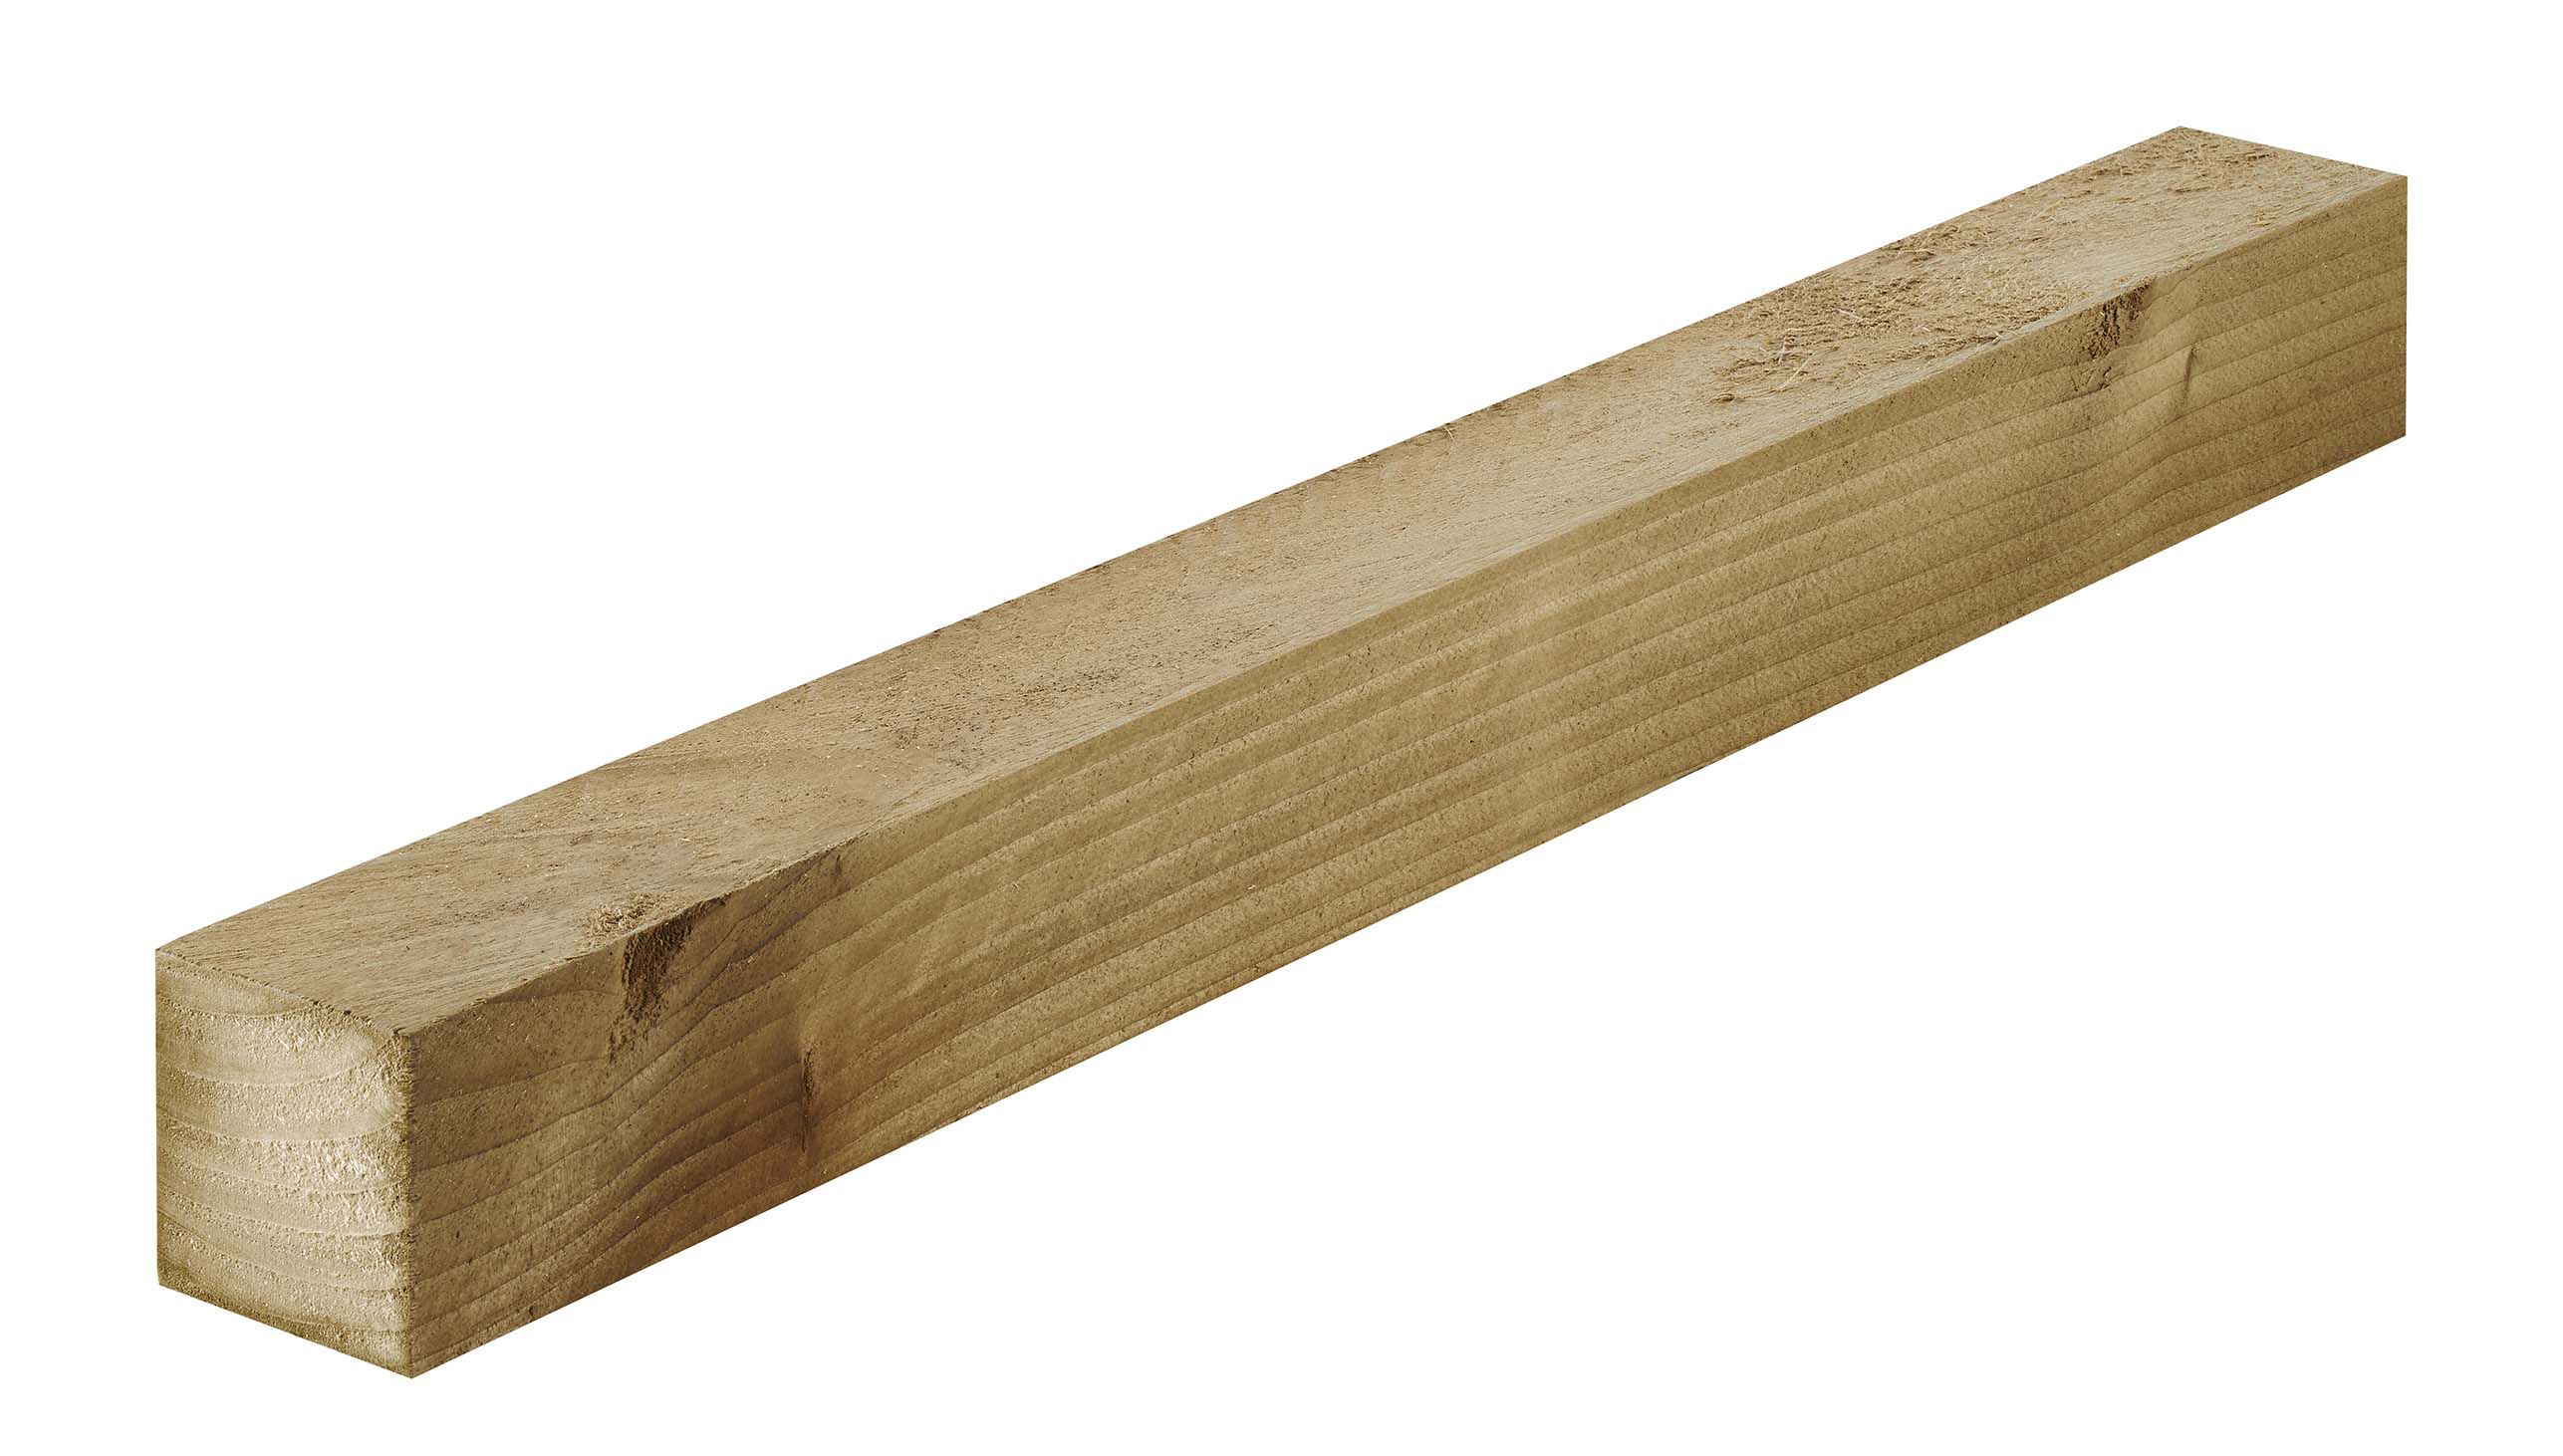 Treated Rough Sawn Treated Stick timber (L)1.8m (W)50mm (T)47mm